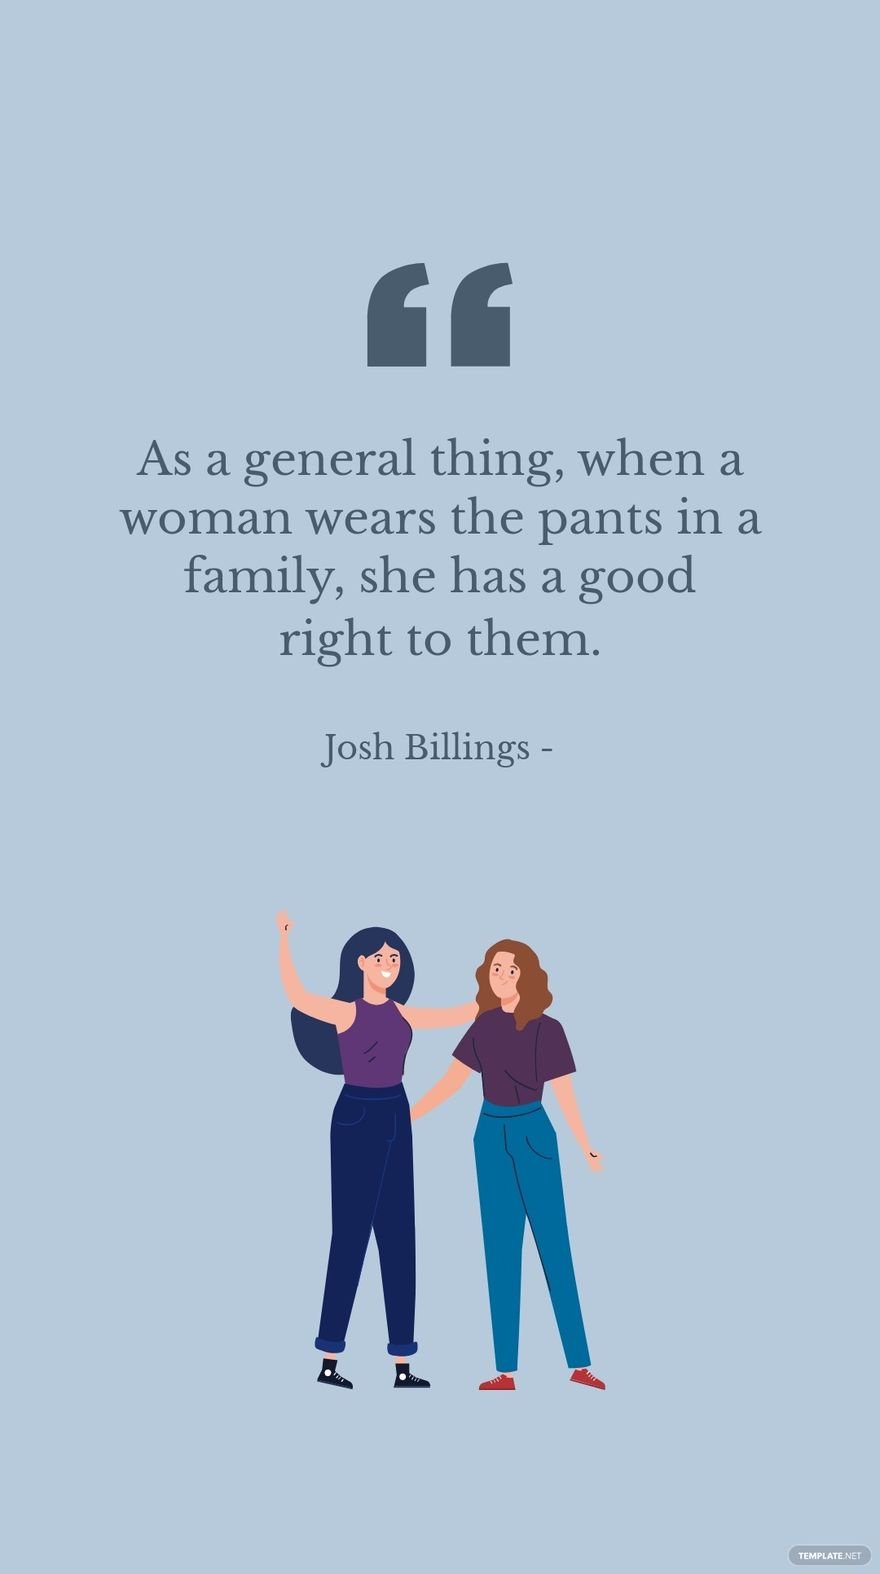 Free Josh Billings - As a general thing, when a woman wears the pants in a family, she has a good right to them. in JPG